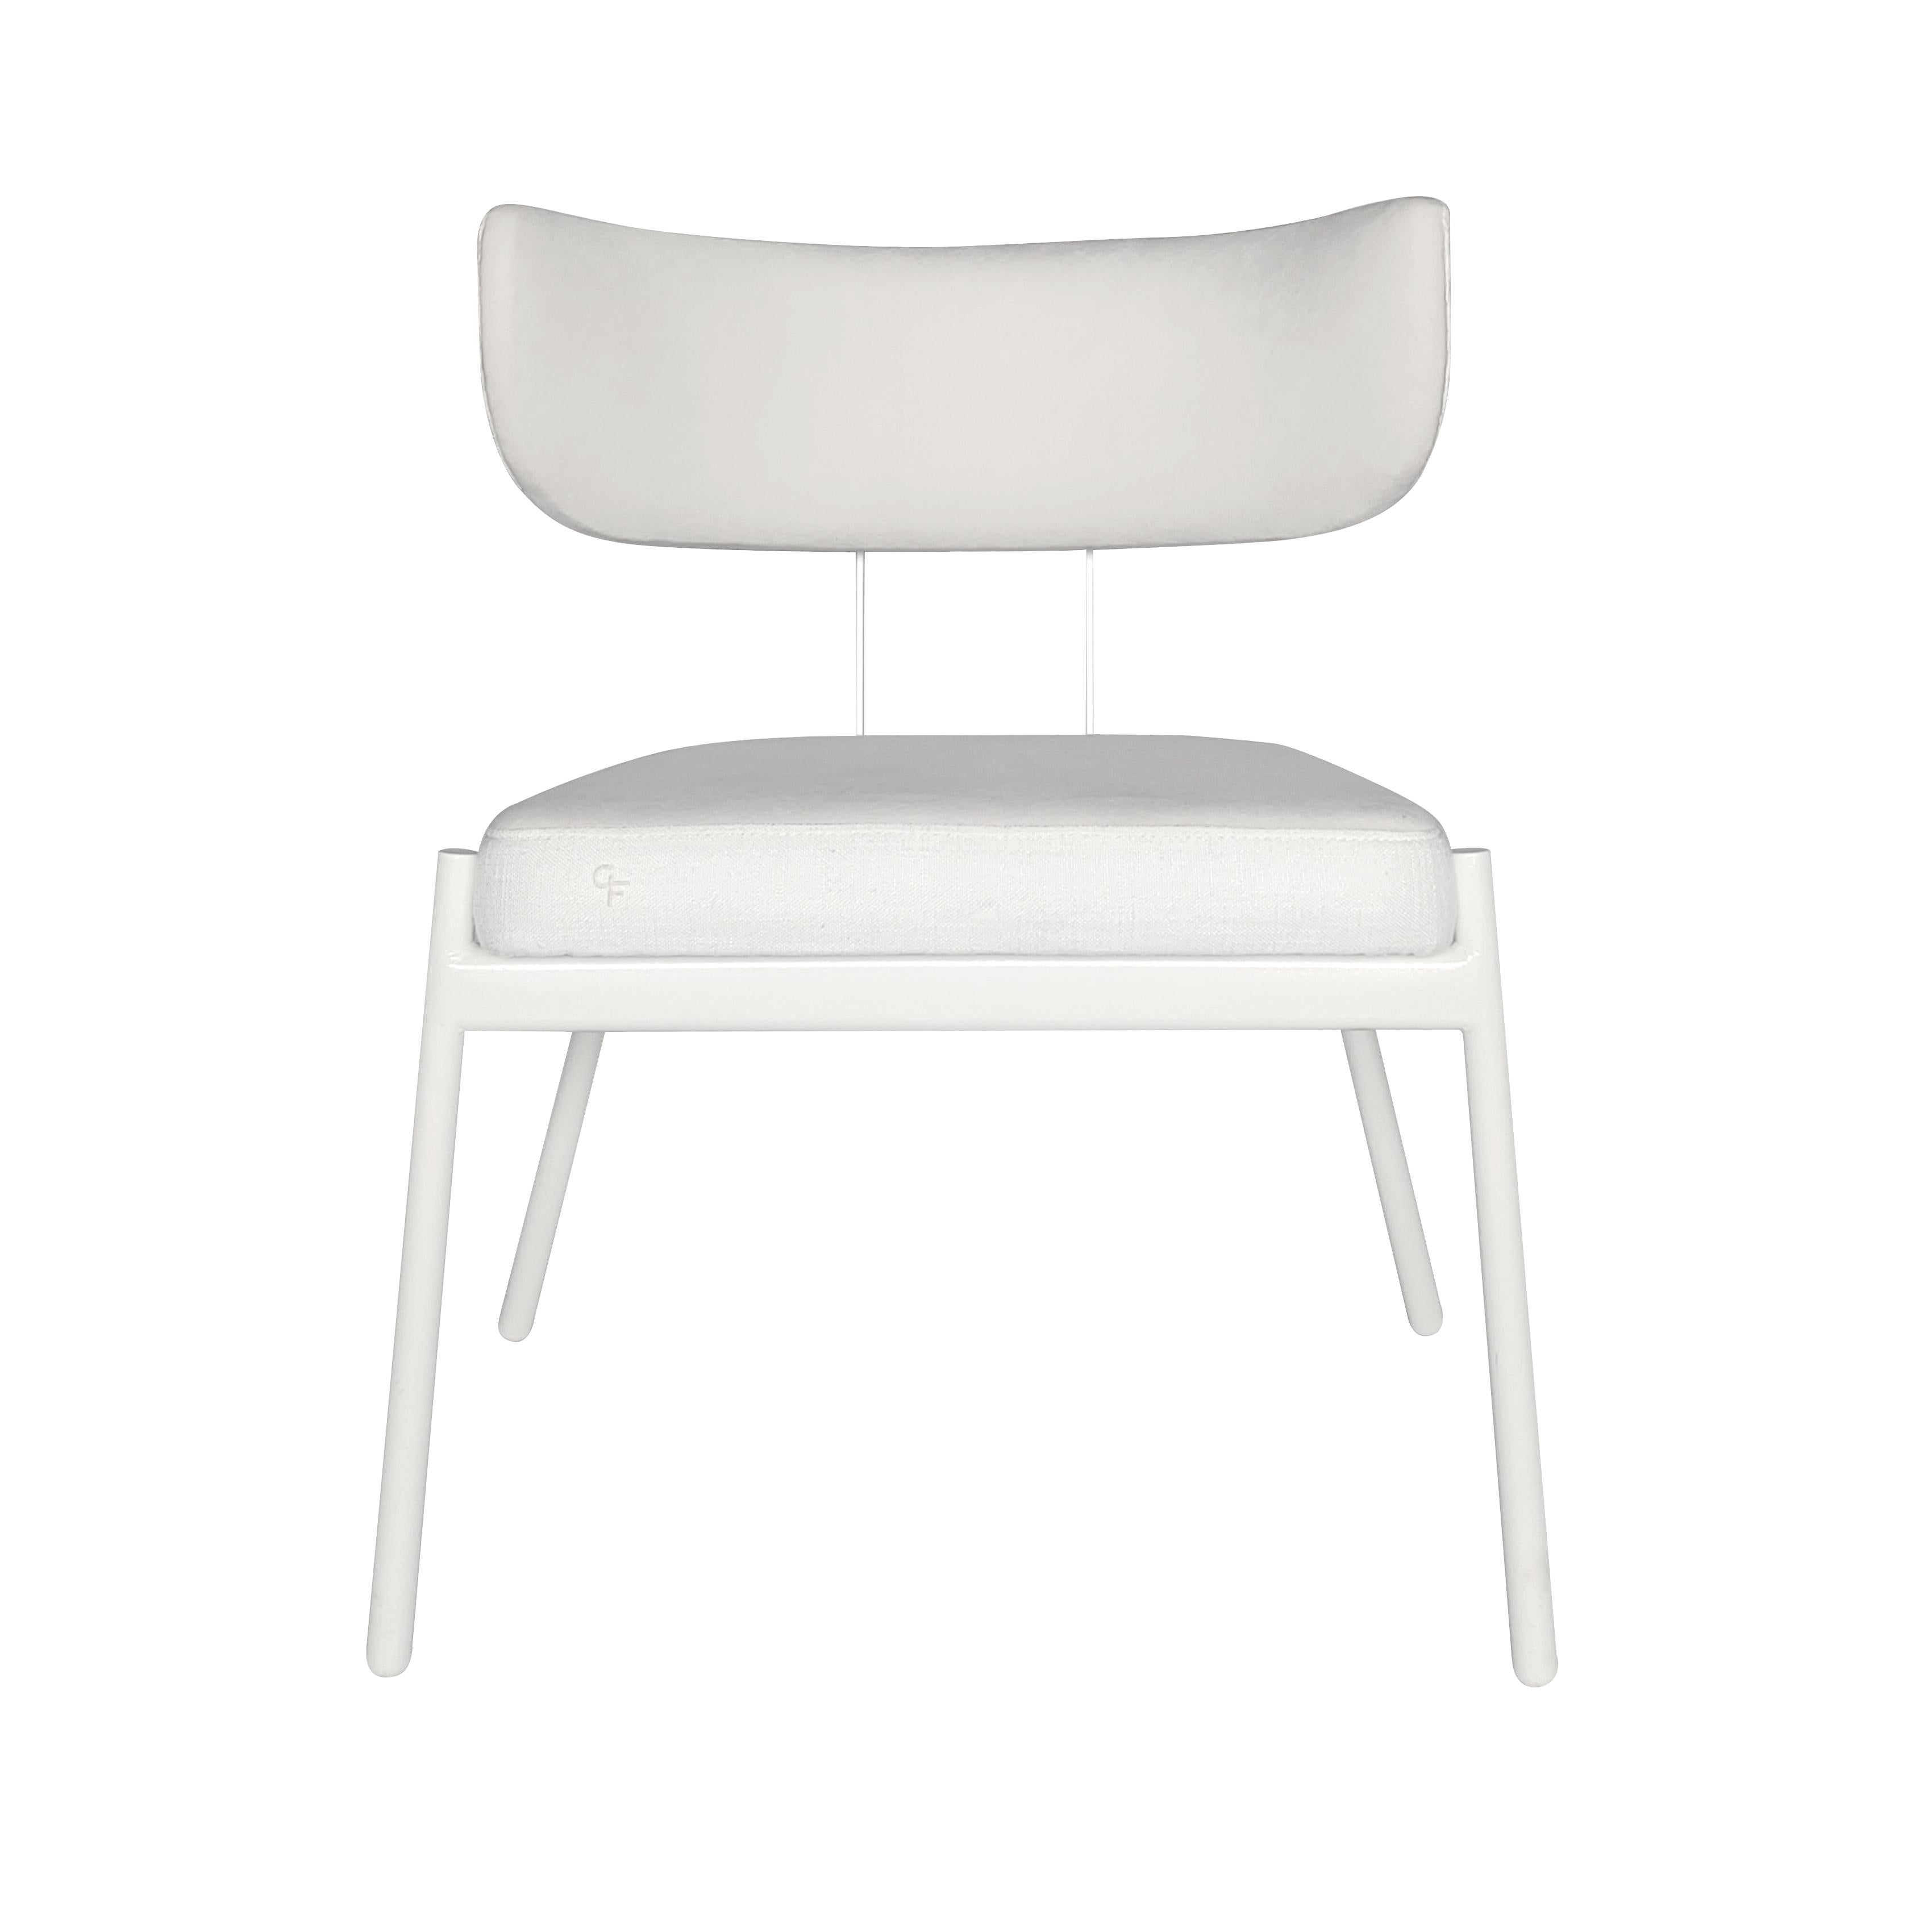 White Love chair by Gabriel Freitas In New Condition For Sale In São Paulo, SP